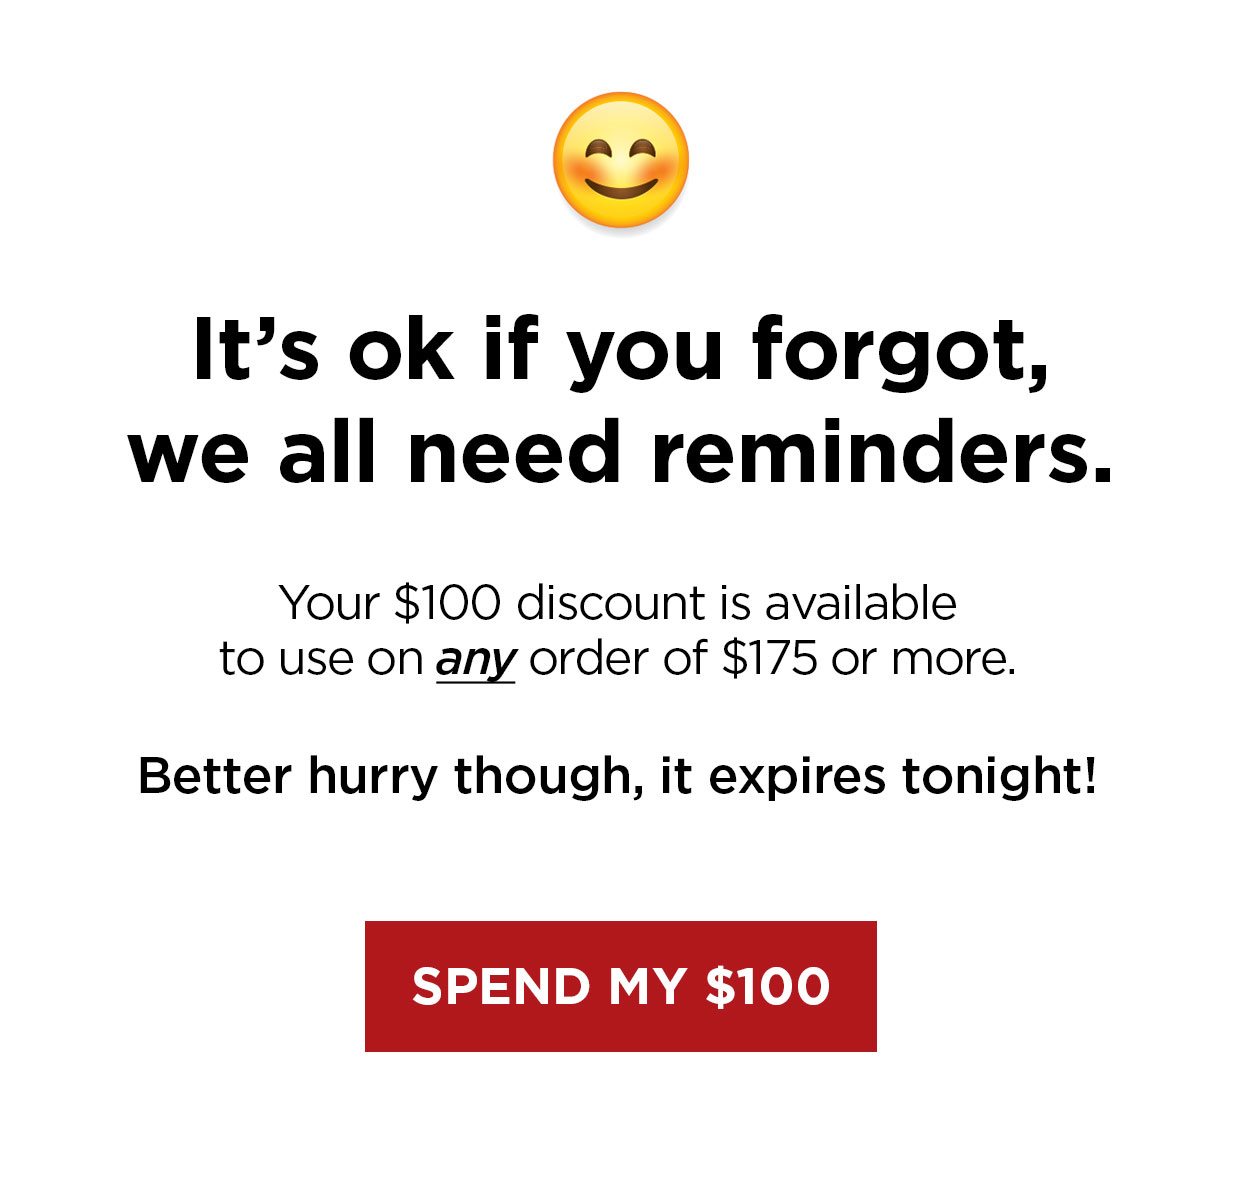 It's ok if you forgot, we all need reminders. Your $100 discount is available to use on any order of $175 or more. Better hurry though, it expires tonight! Spend my $100 button.